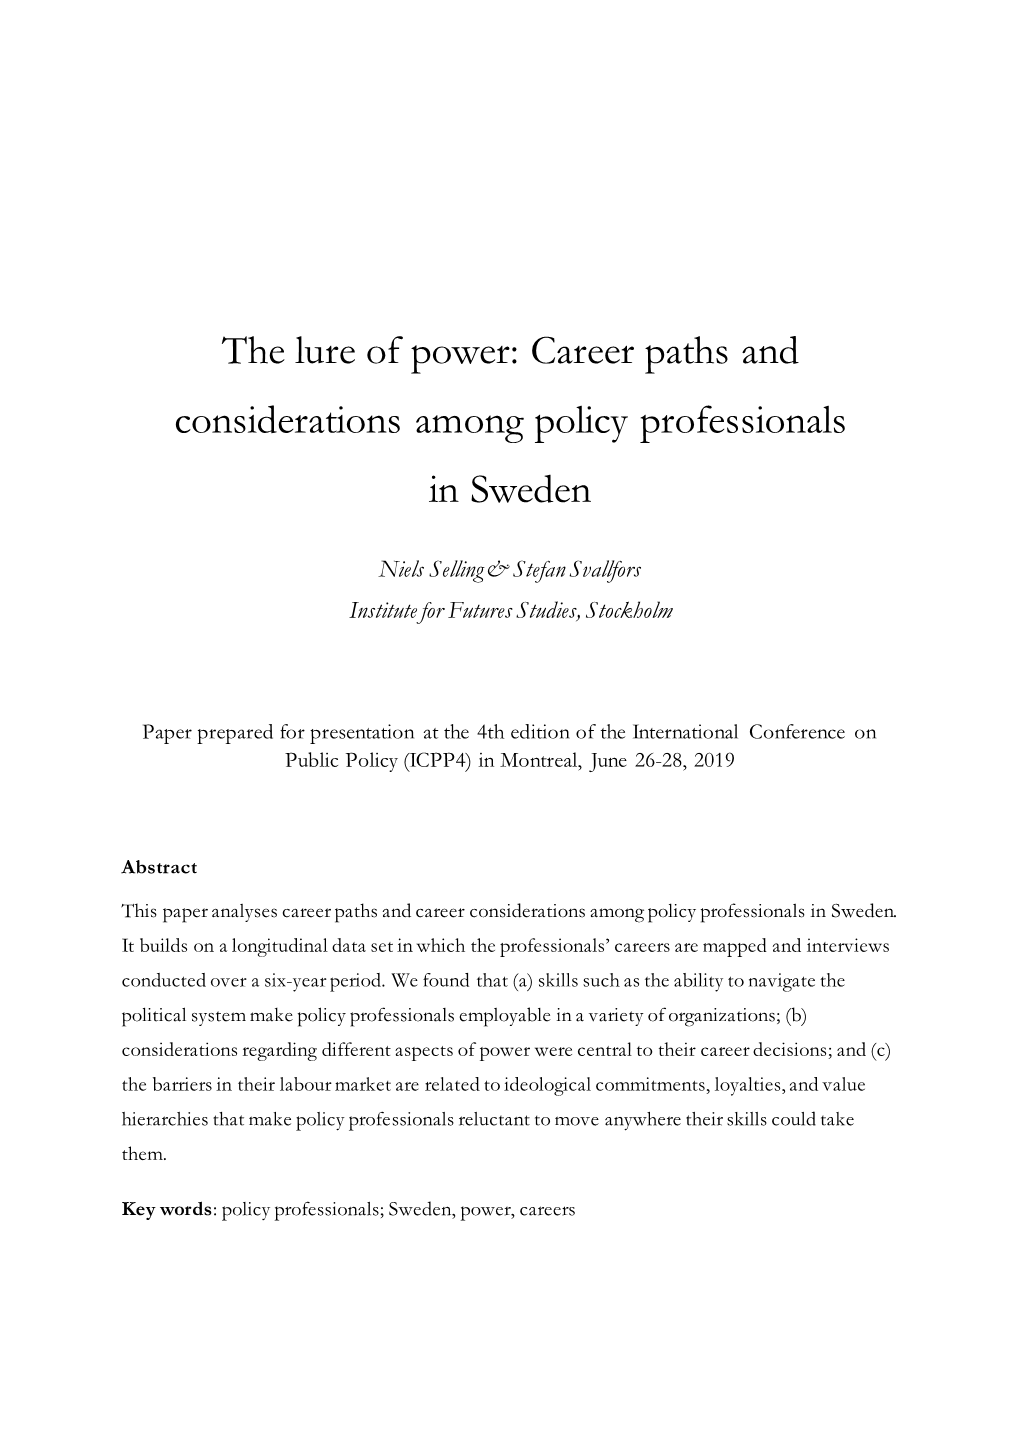 The Lure of Power: Career Paths and Considerations Among Policy Professionals in Sweden